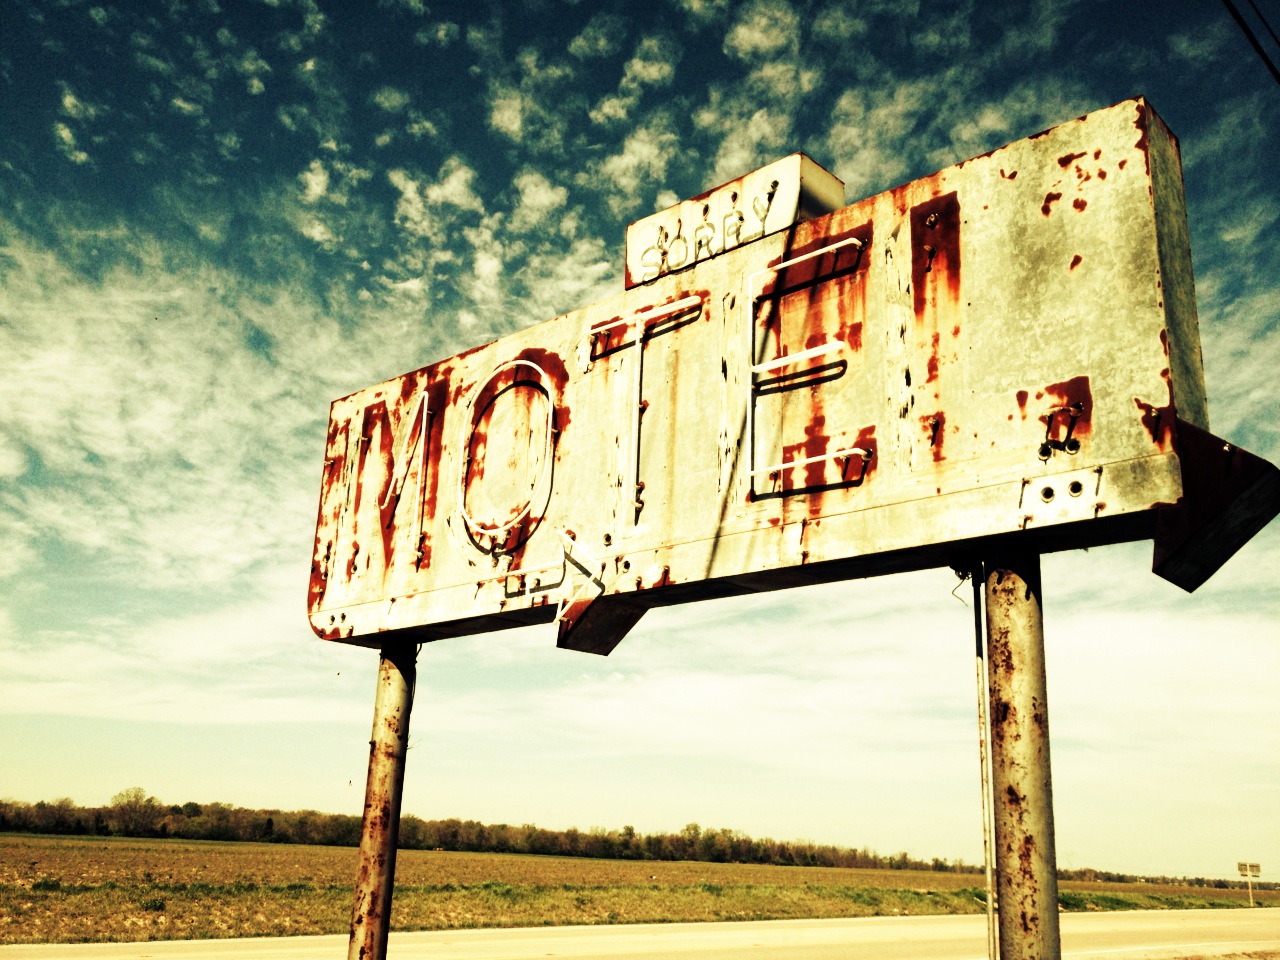 Welcome to the Roach Motel